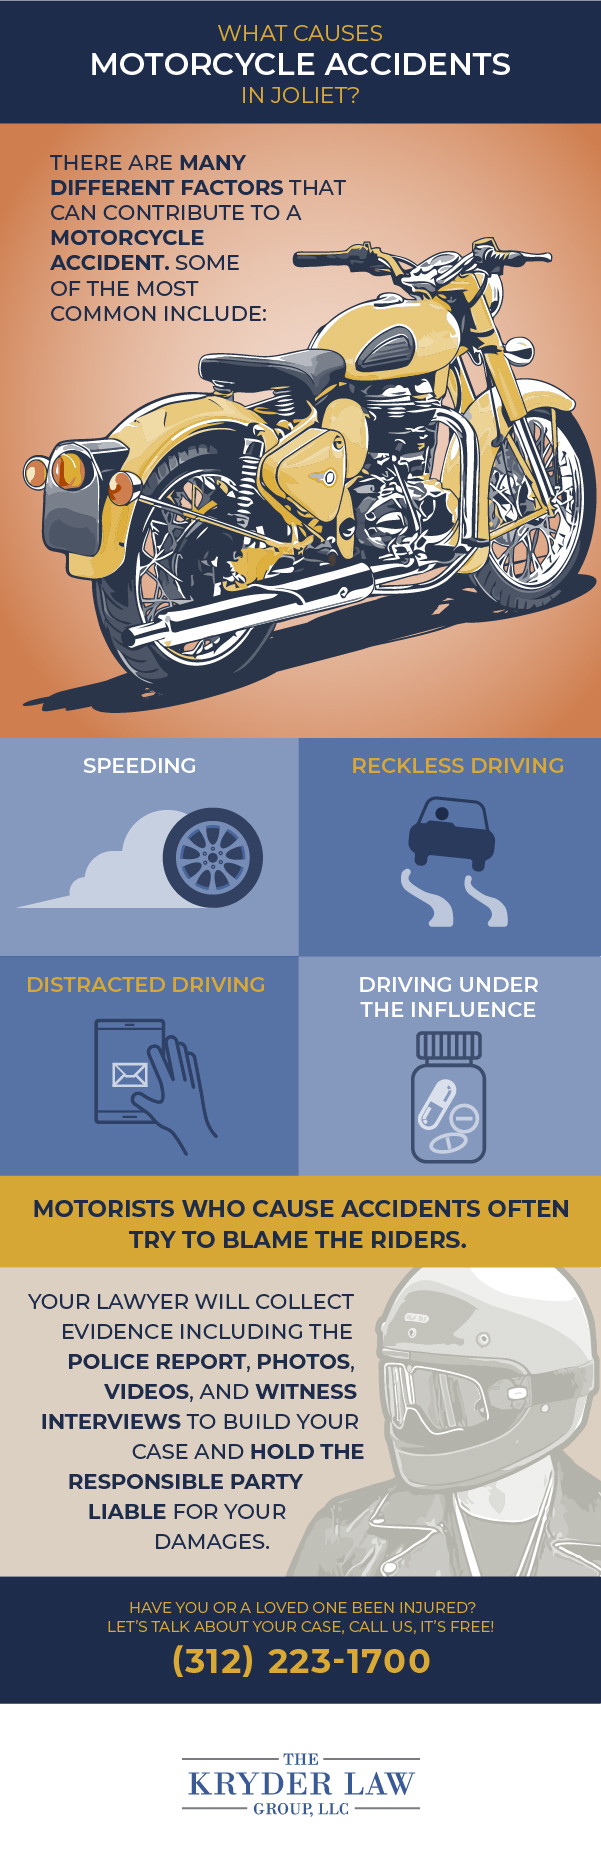 Joliet Motorcycle Accident Causes Infographic